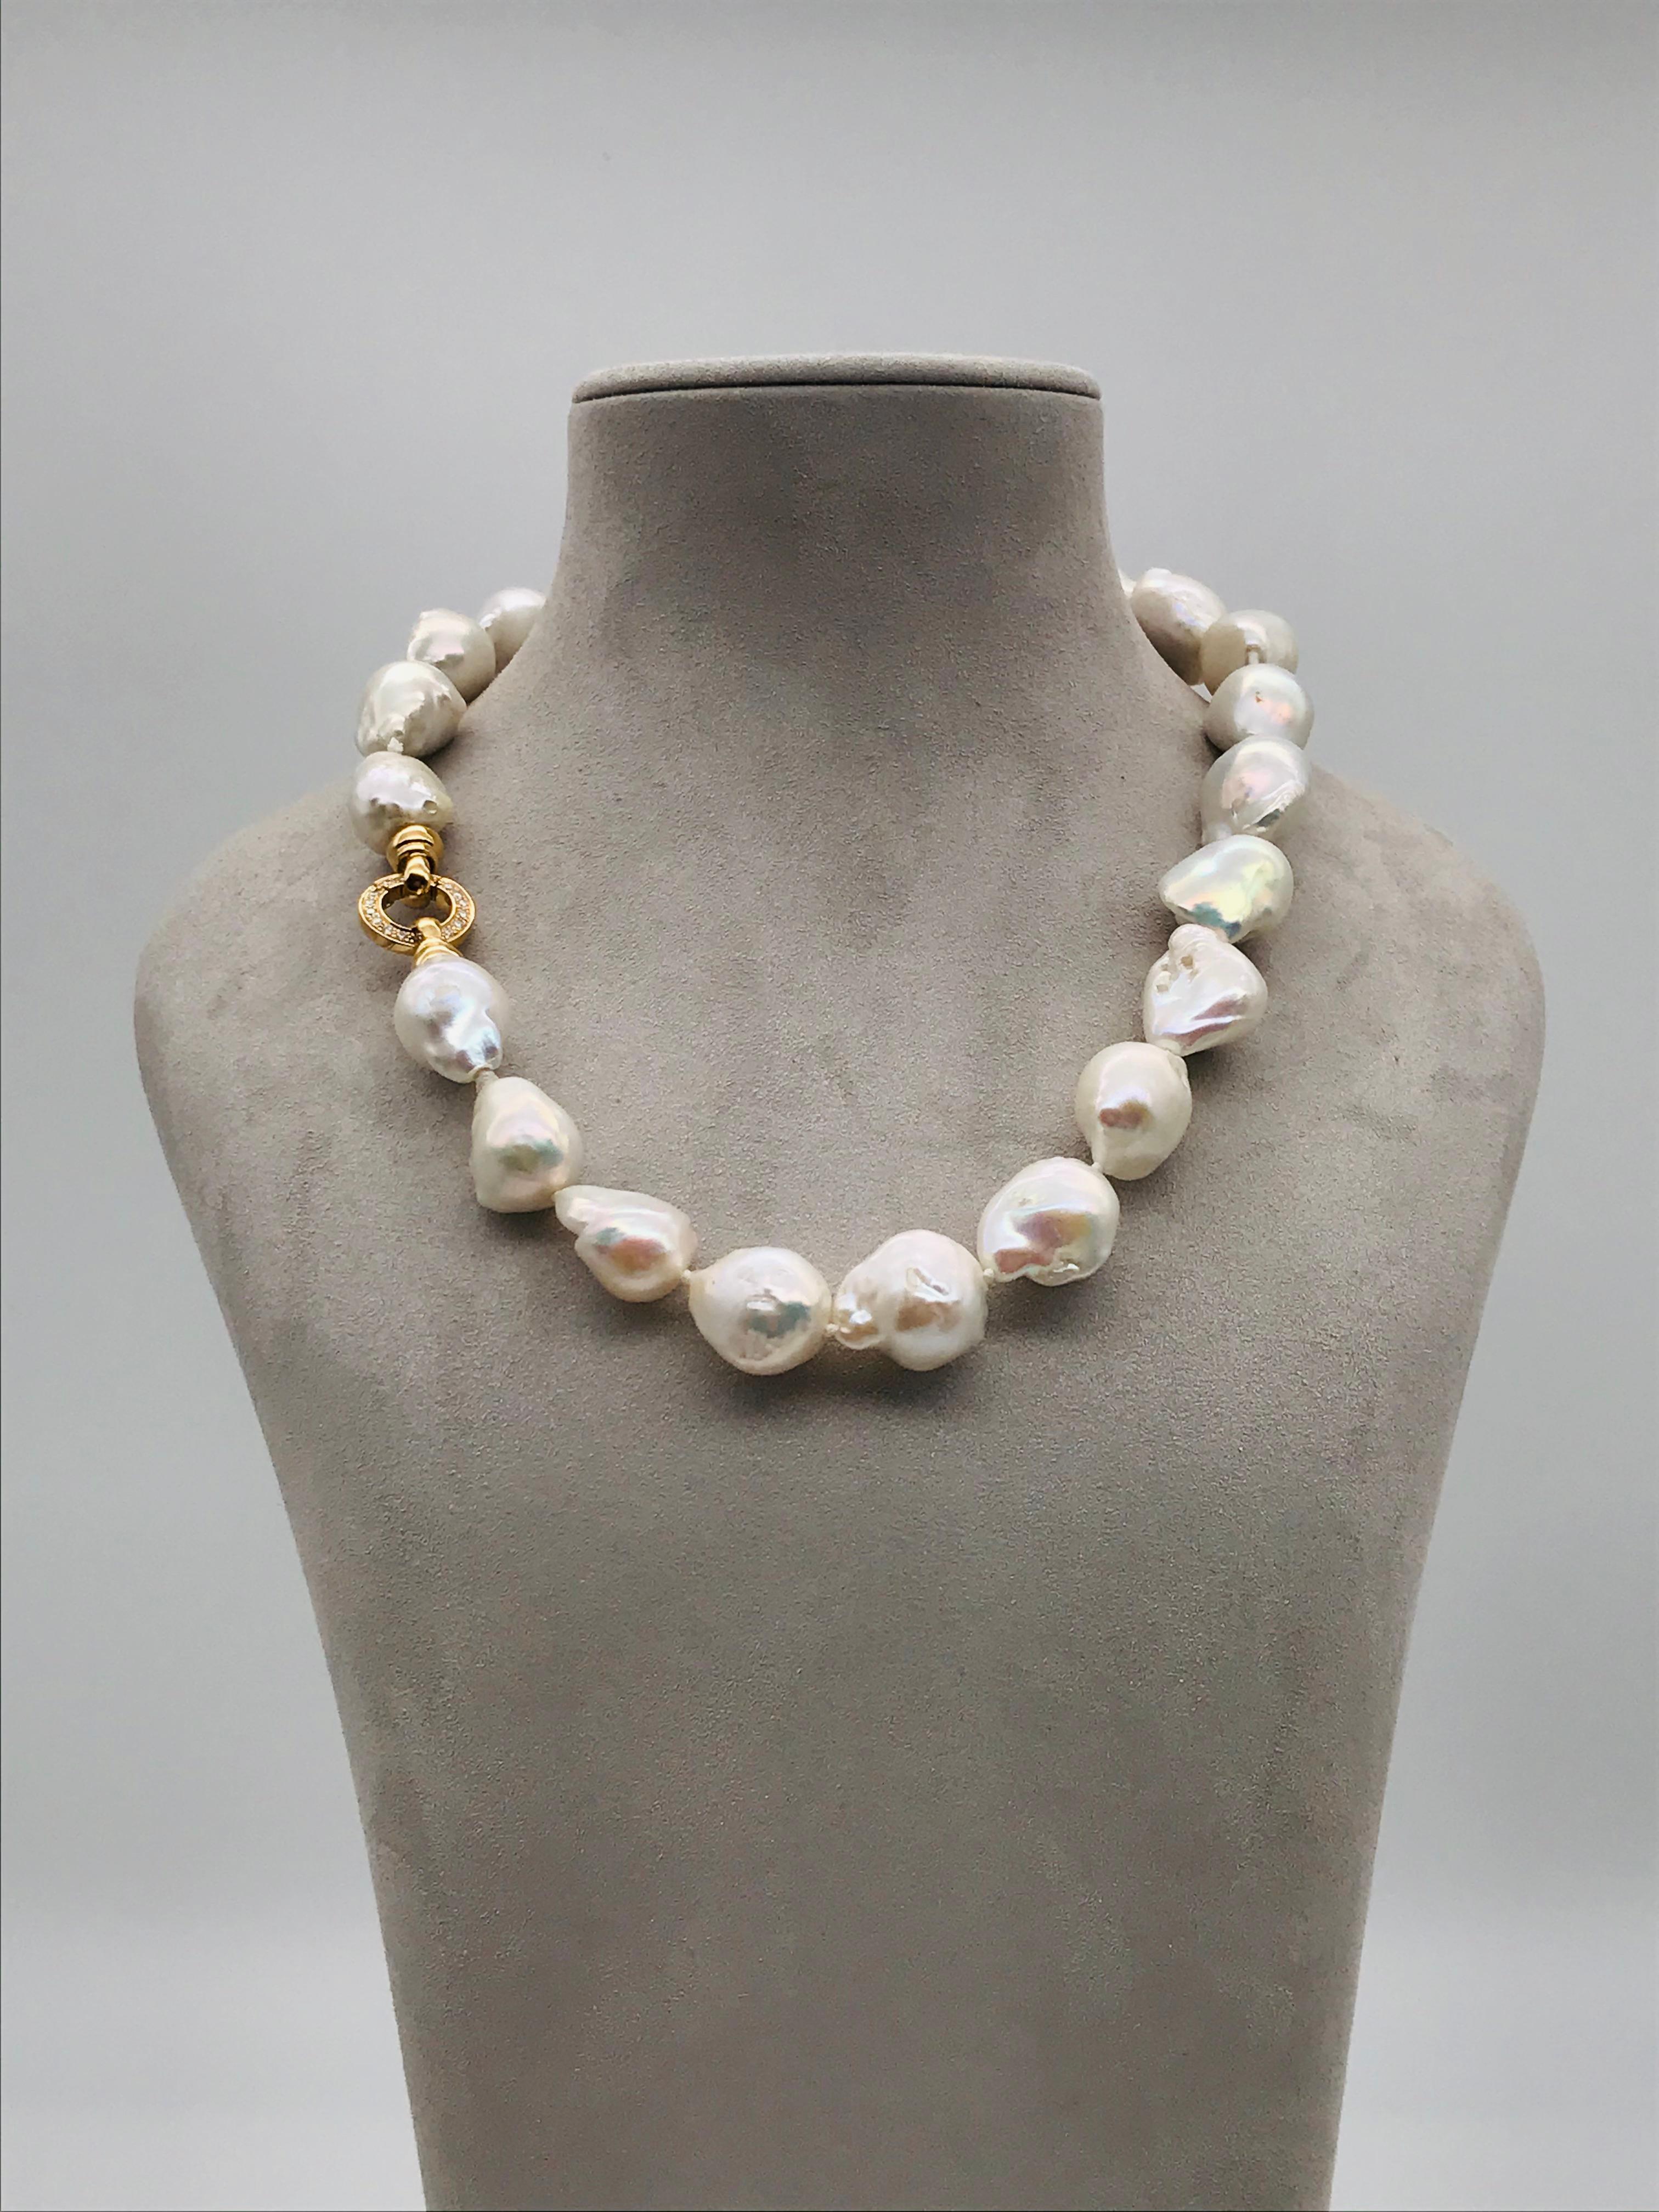 Baroques Pearls Necklaces With Gold and Diamonds Clasp 
22 Baroque South Sea pearls 
Diamonds and Gold 18K Claps 
